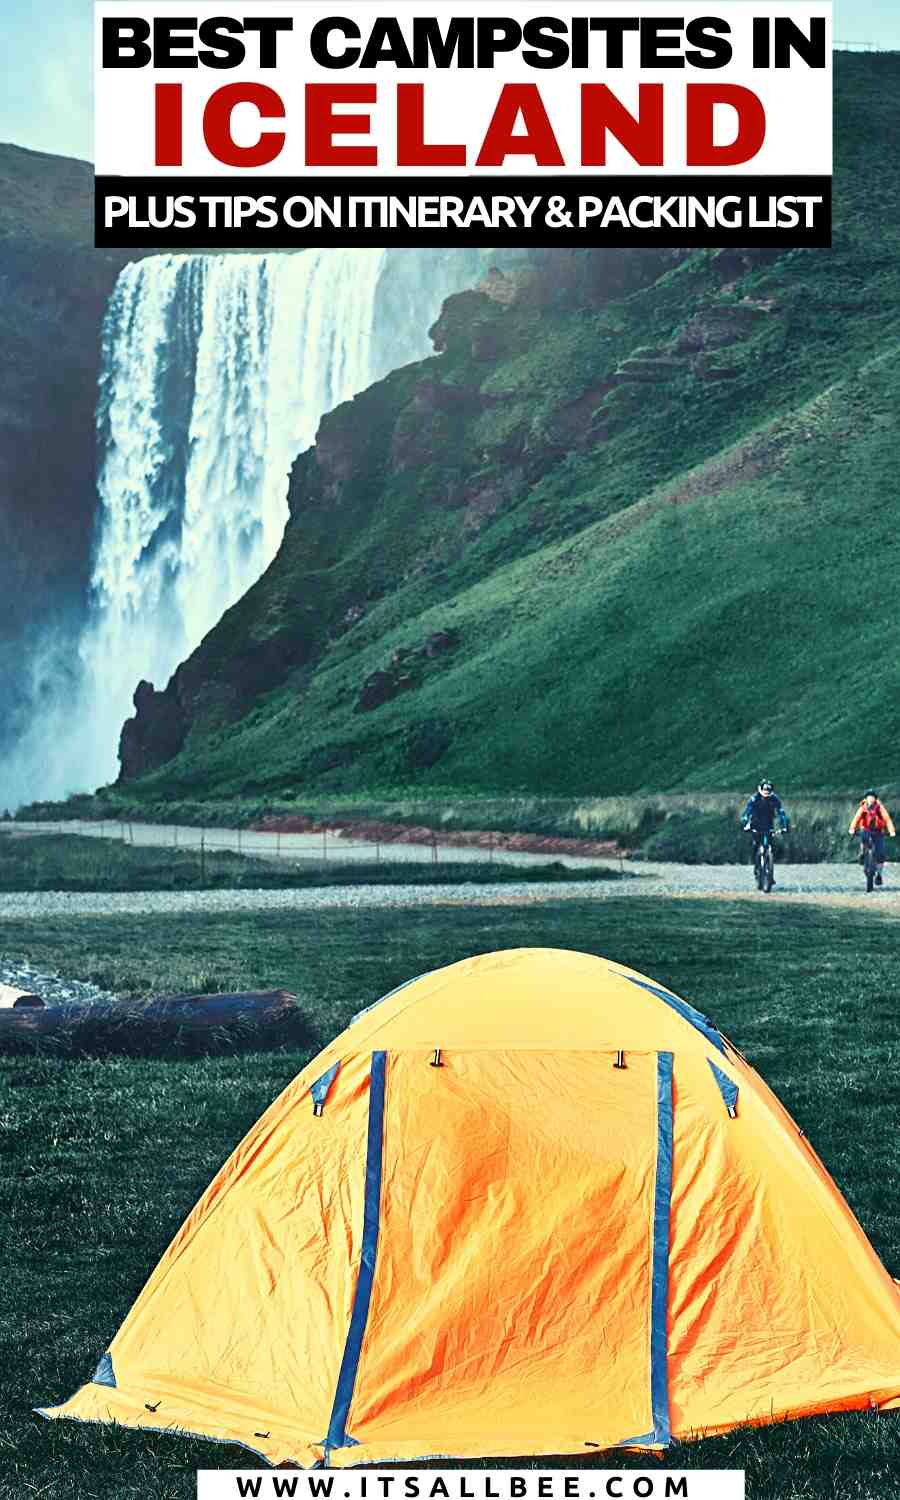 Camping near blue lagoon | Places to camp in Iceland | camping in Iceland | Campsites near waterfalls in Iceland